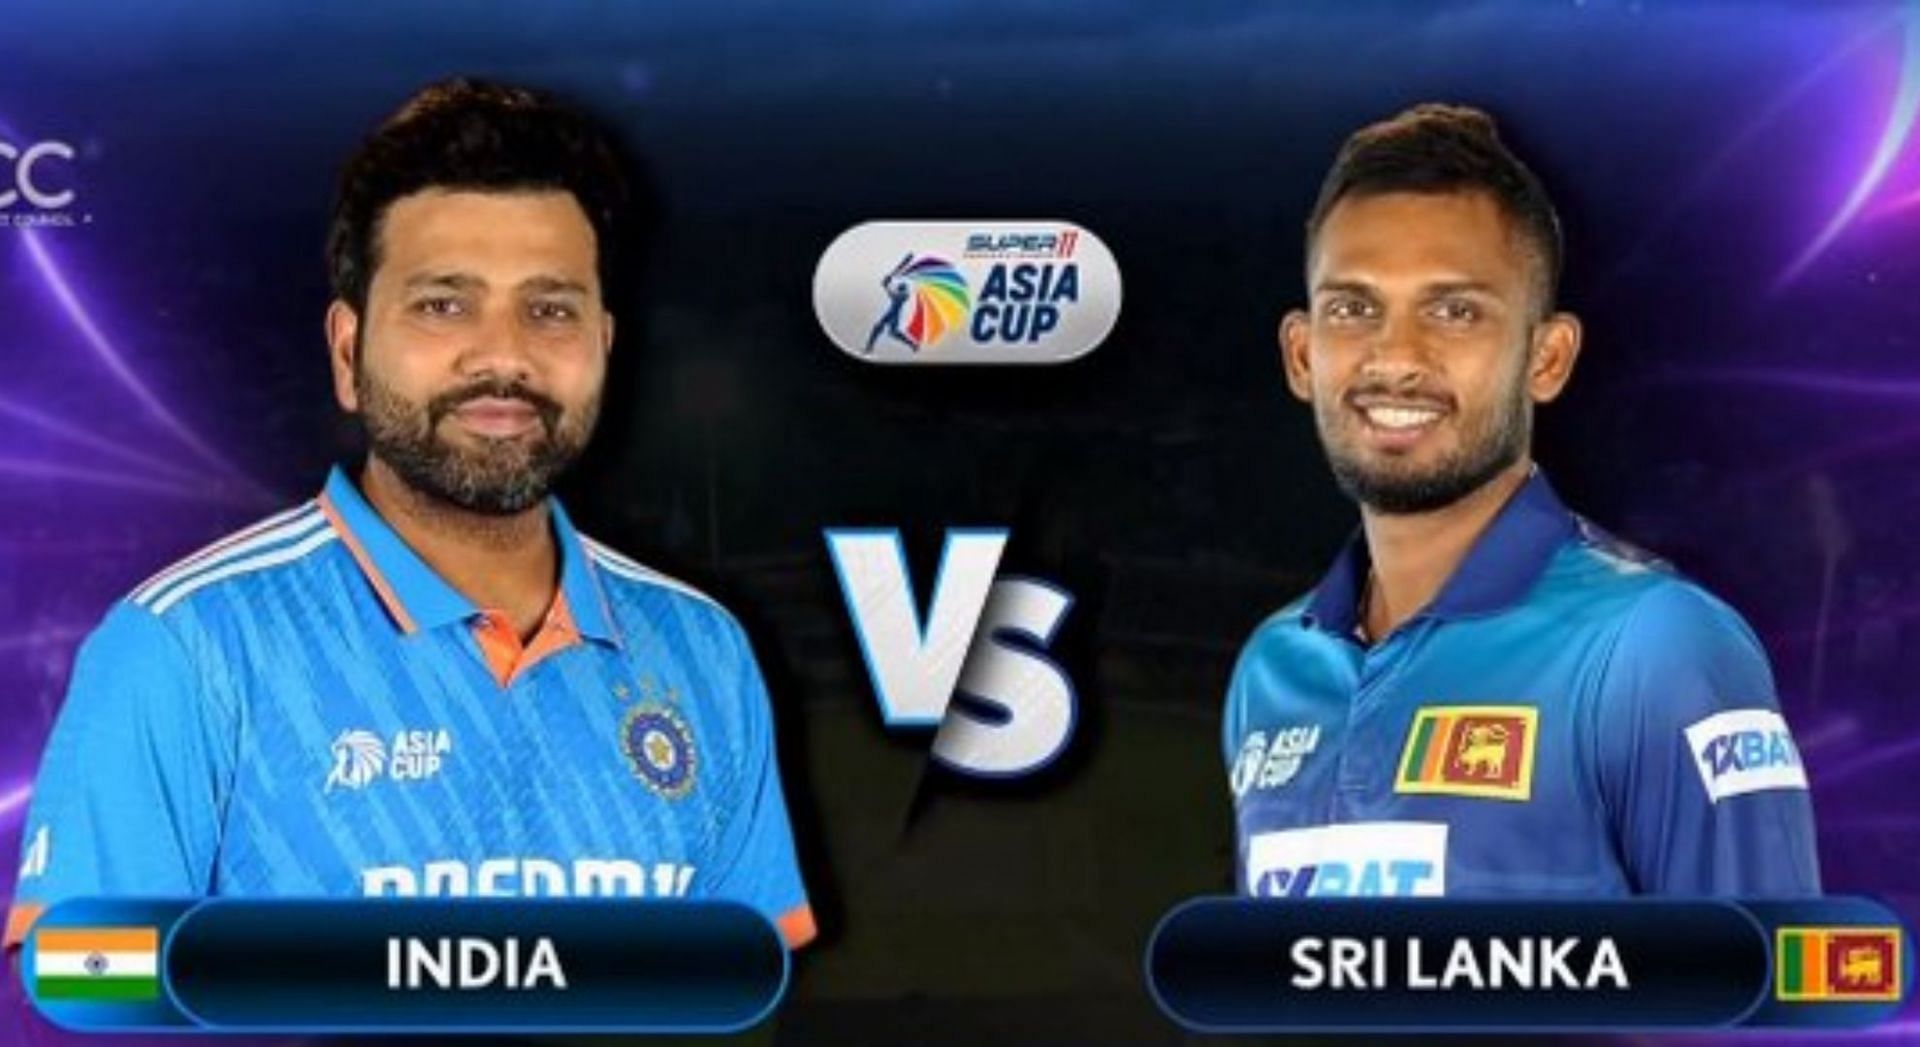 IND vs SL Scorecard, Highlights and Results of India and Sri Lankas previous matches in Asia Cup